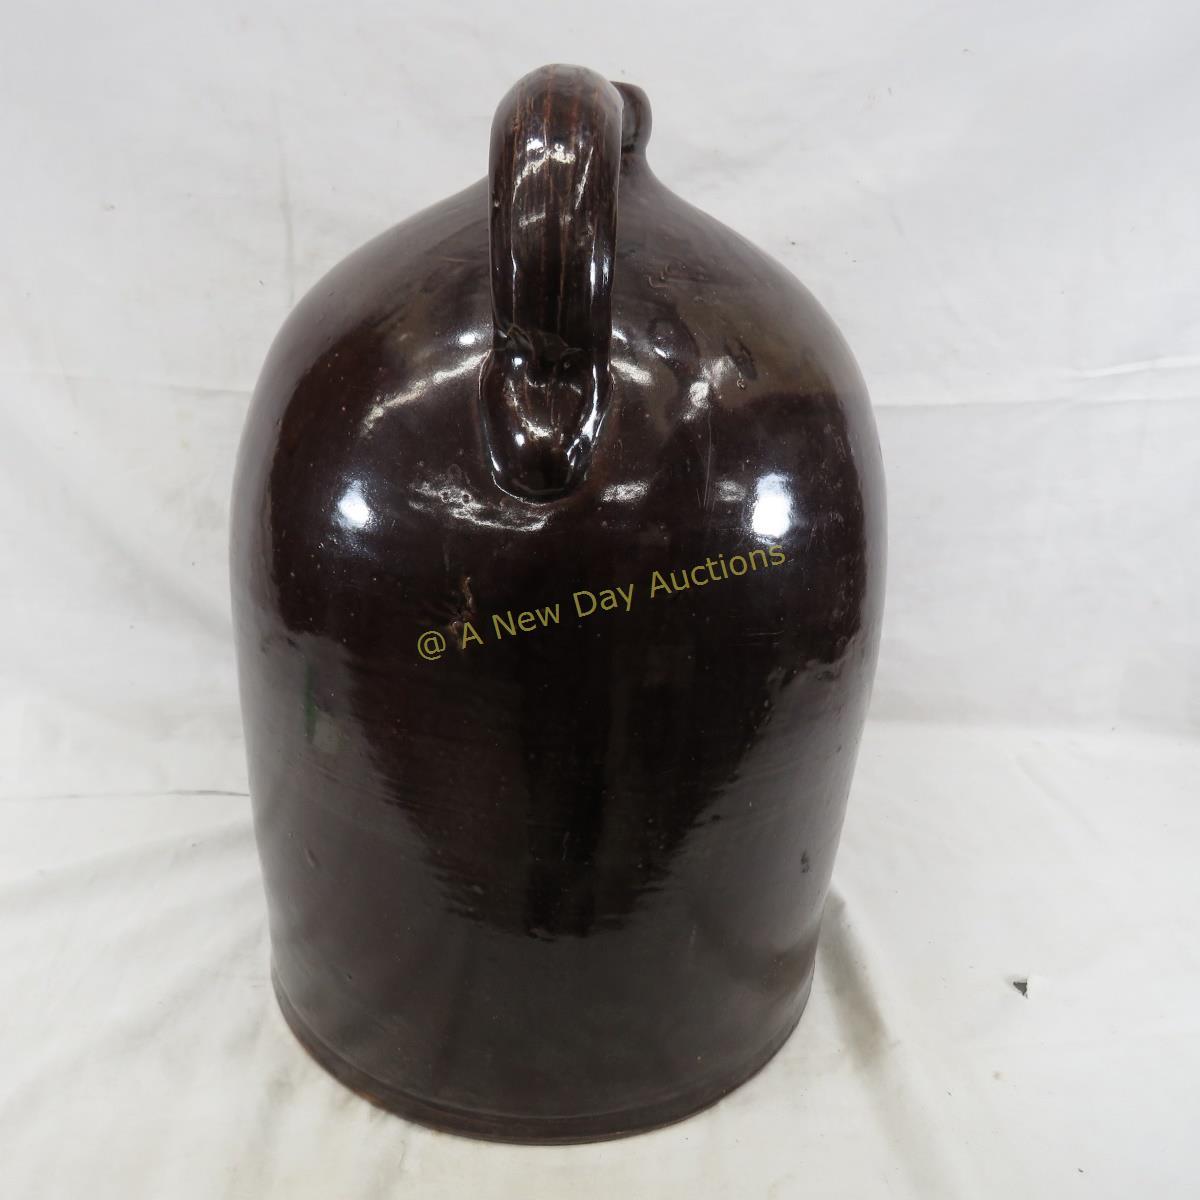 Red Wing 5 gallon albany slip beehive jug